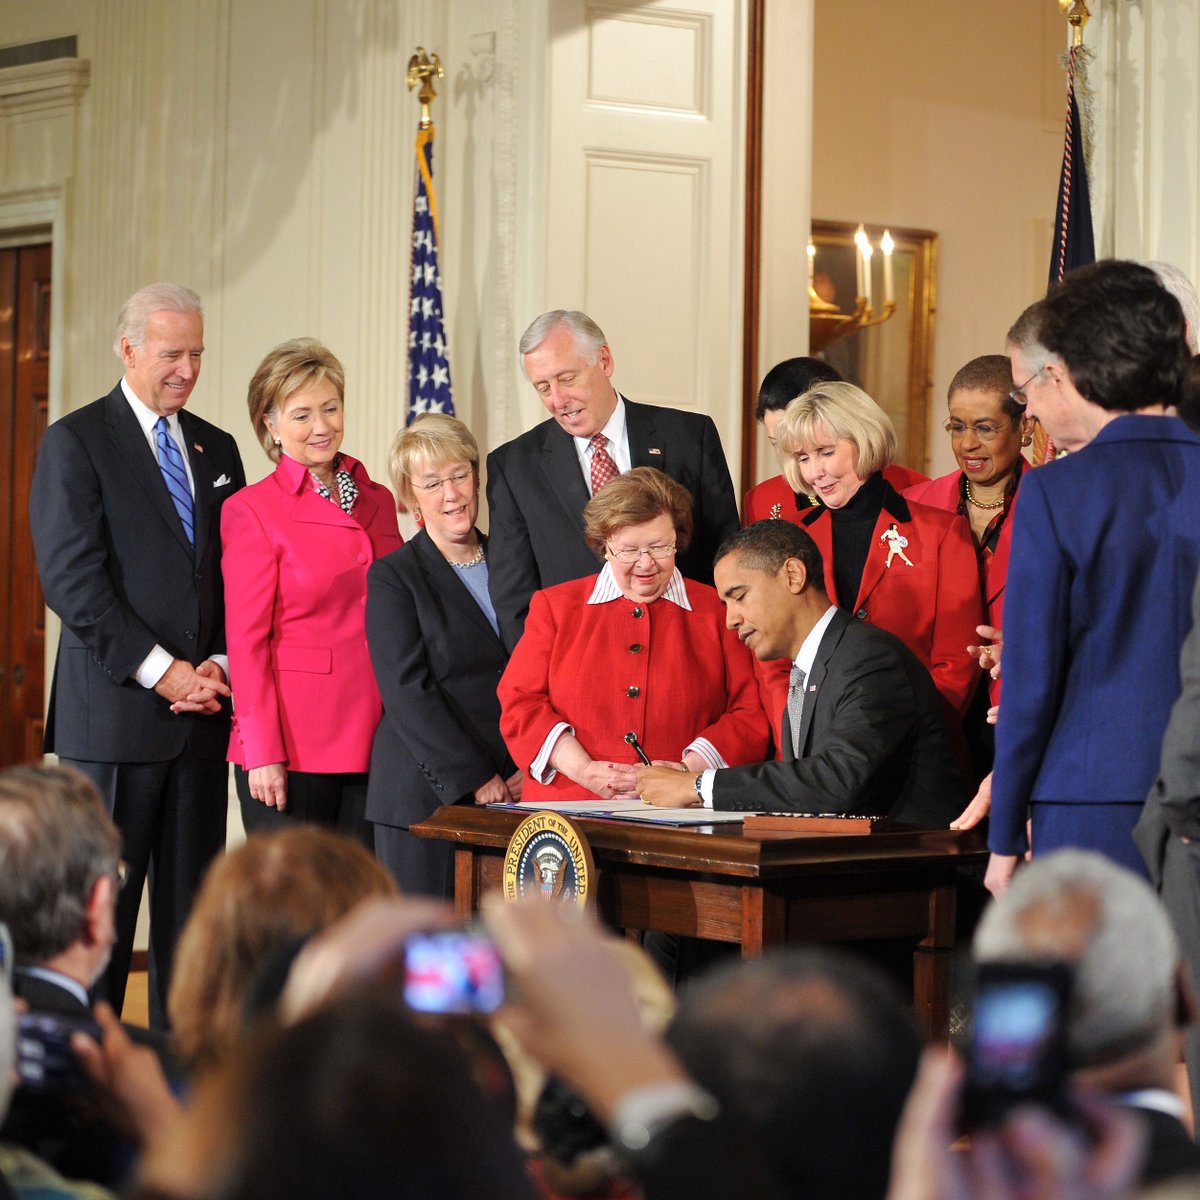 Fifteen years ago today, in a landmark victory in the fight for equal pay, the Lilly Ledbetter Fair Pay Act became the law of the land.

The first bill signed during the Obama-Biden administration, the law expanded important protections against pay discrimination and was named